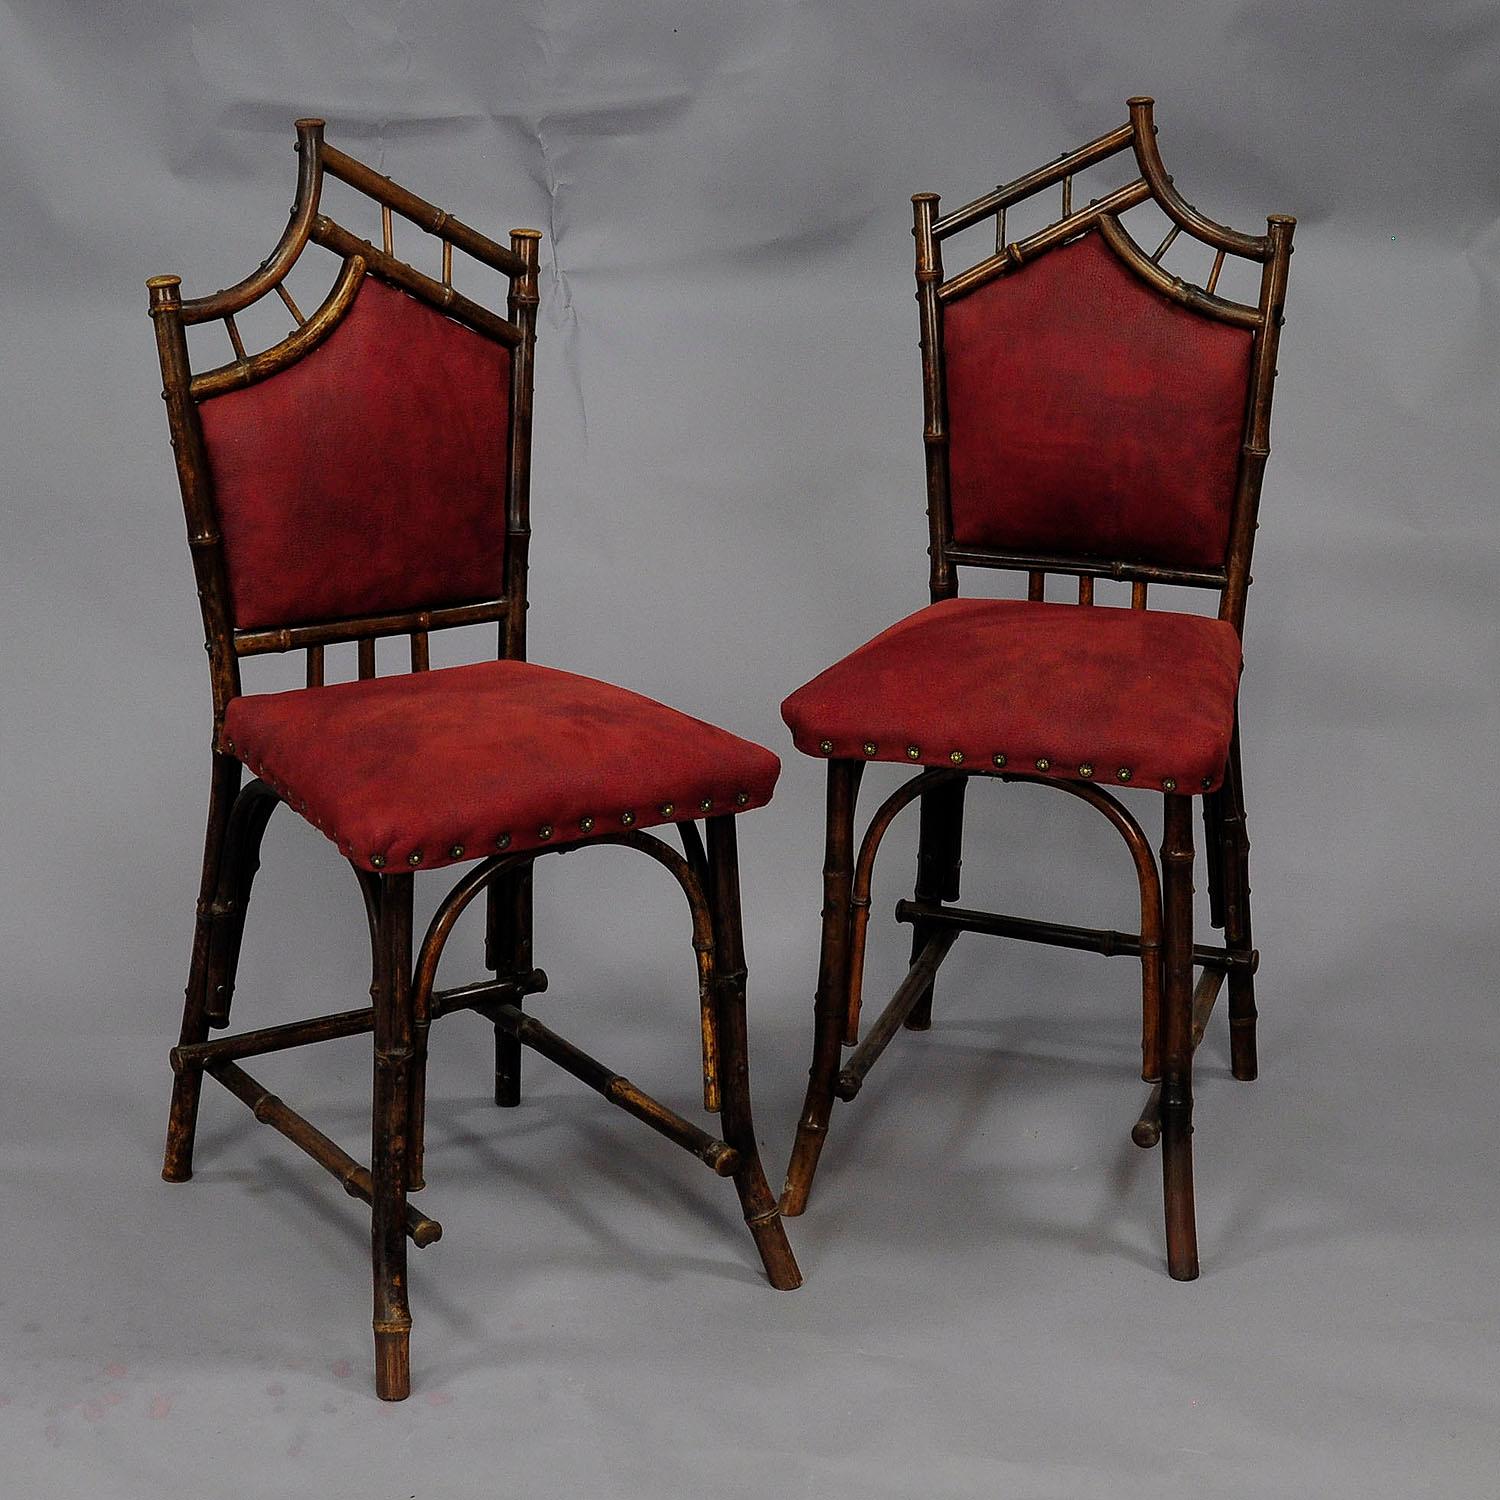 Art Deco Asian Inspired Set of Bamboo Furniture ca. 1930s For Sale